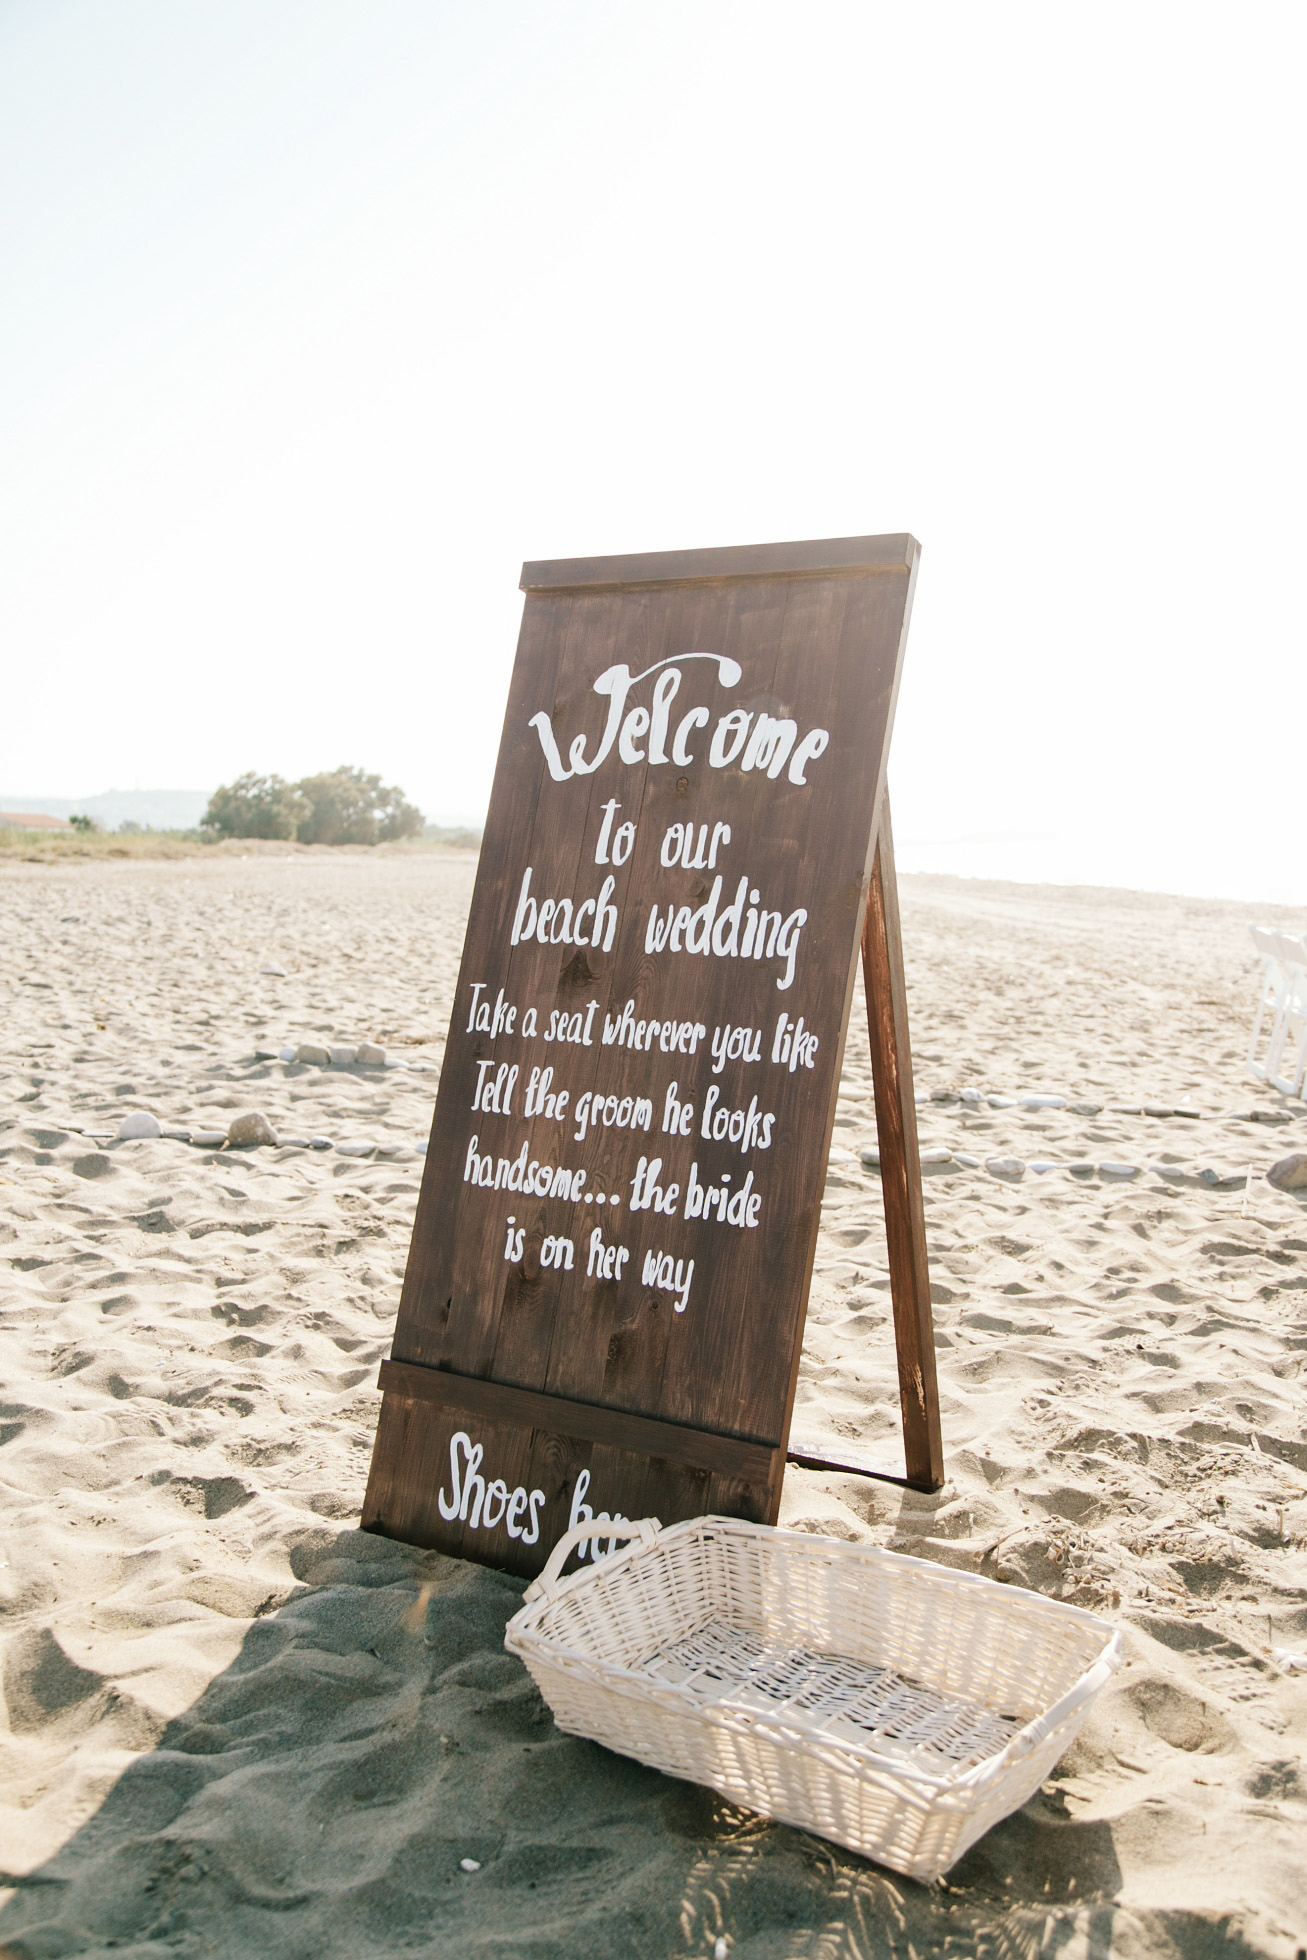 Welcome to our beach wedding sign positioned at the entrance to the ceremony location on the beach in Crete.